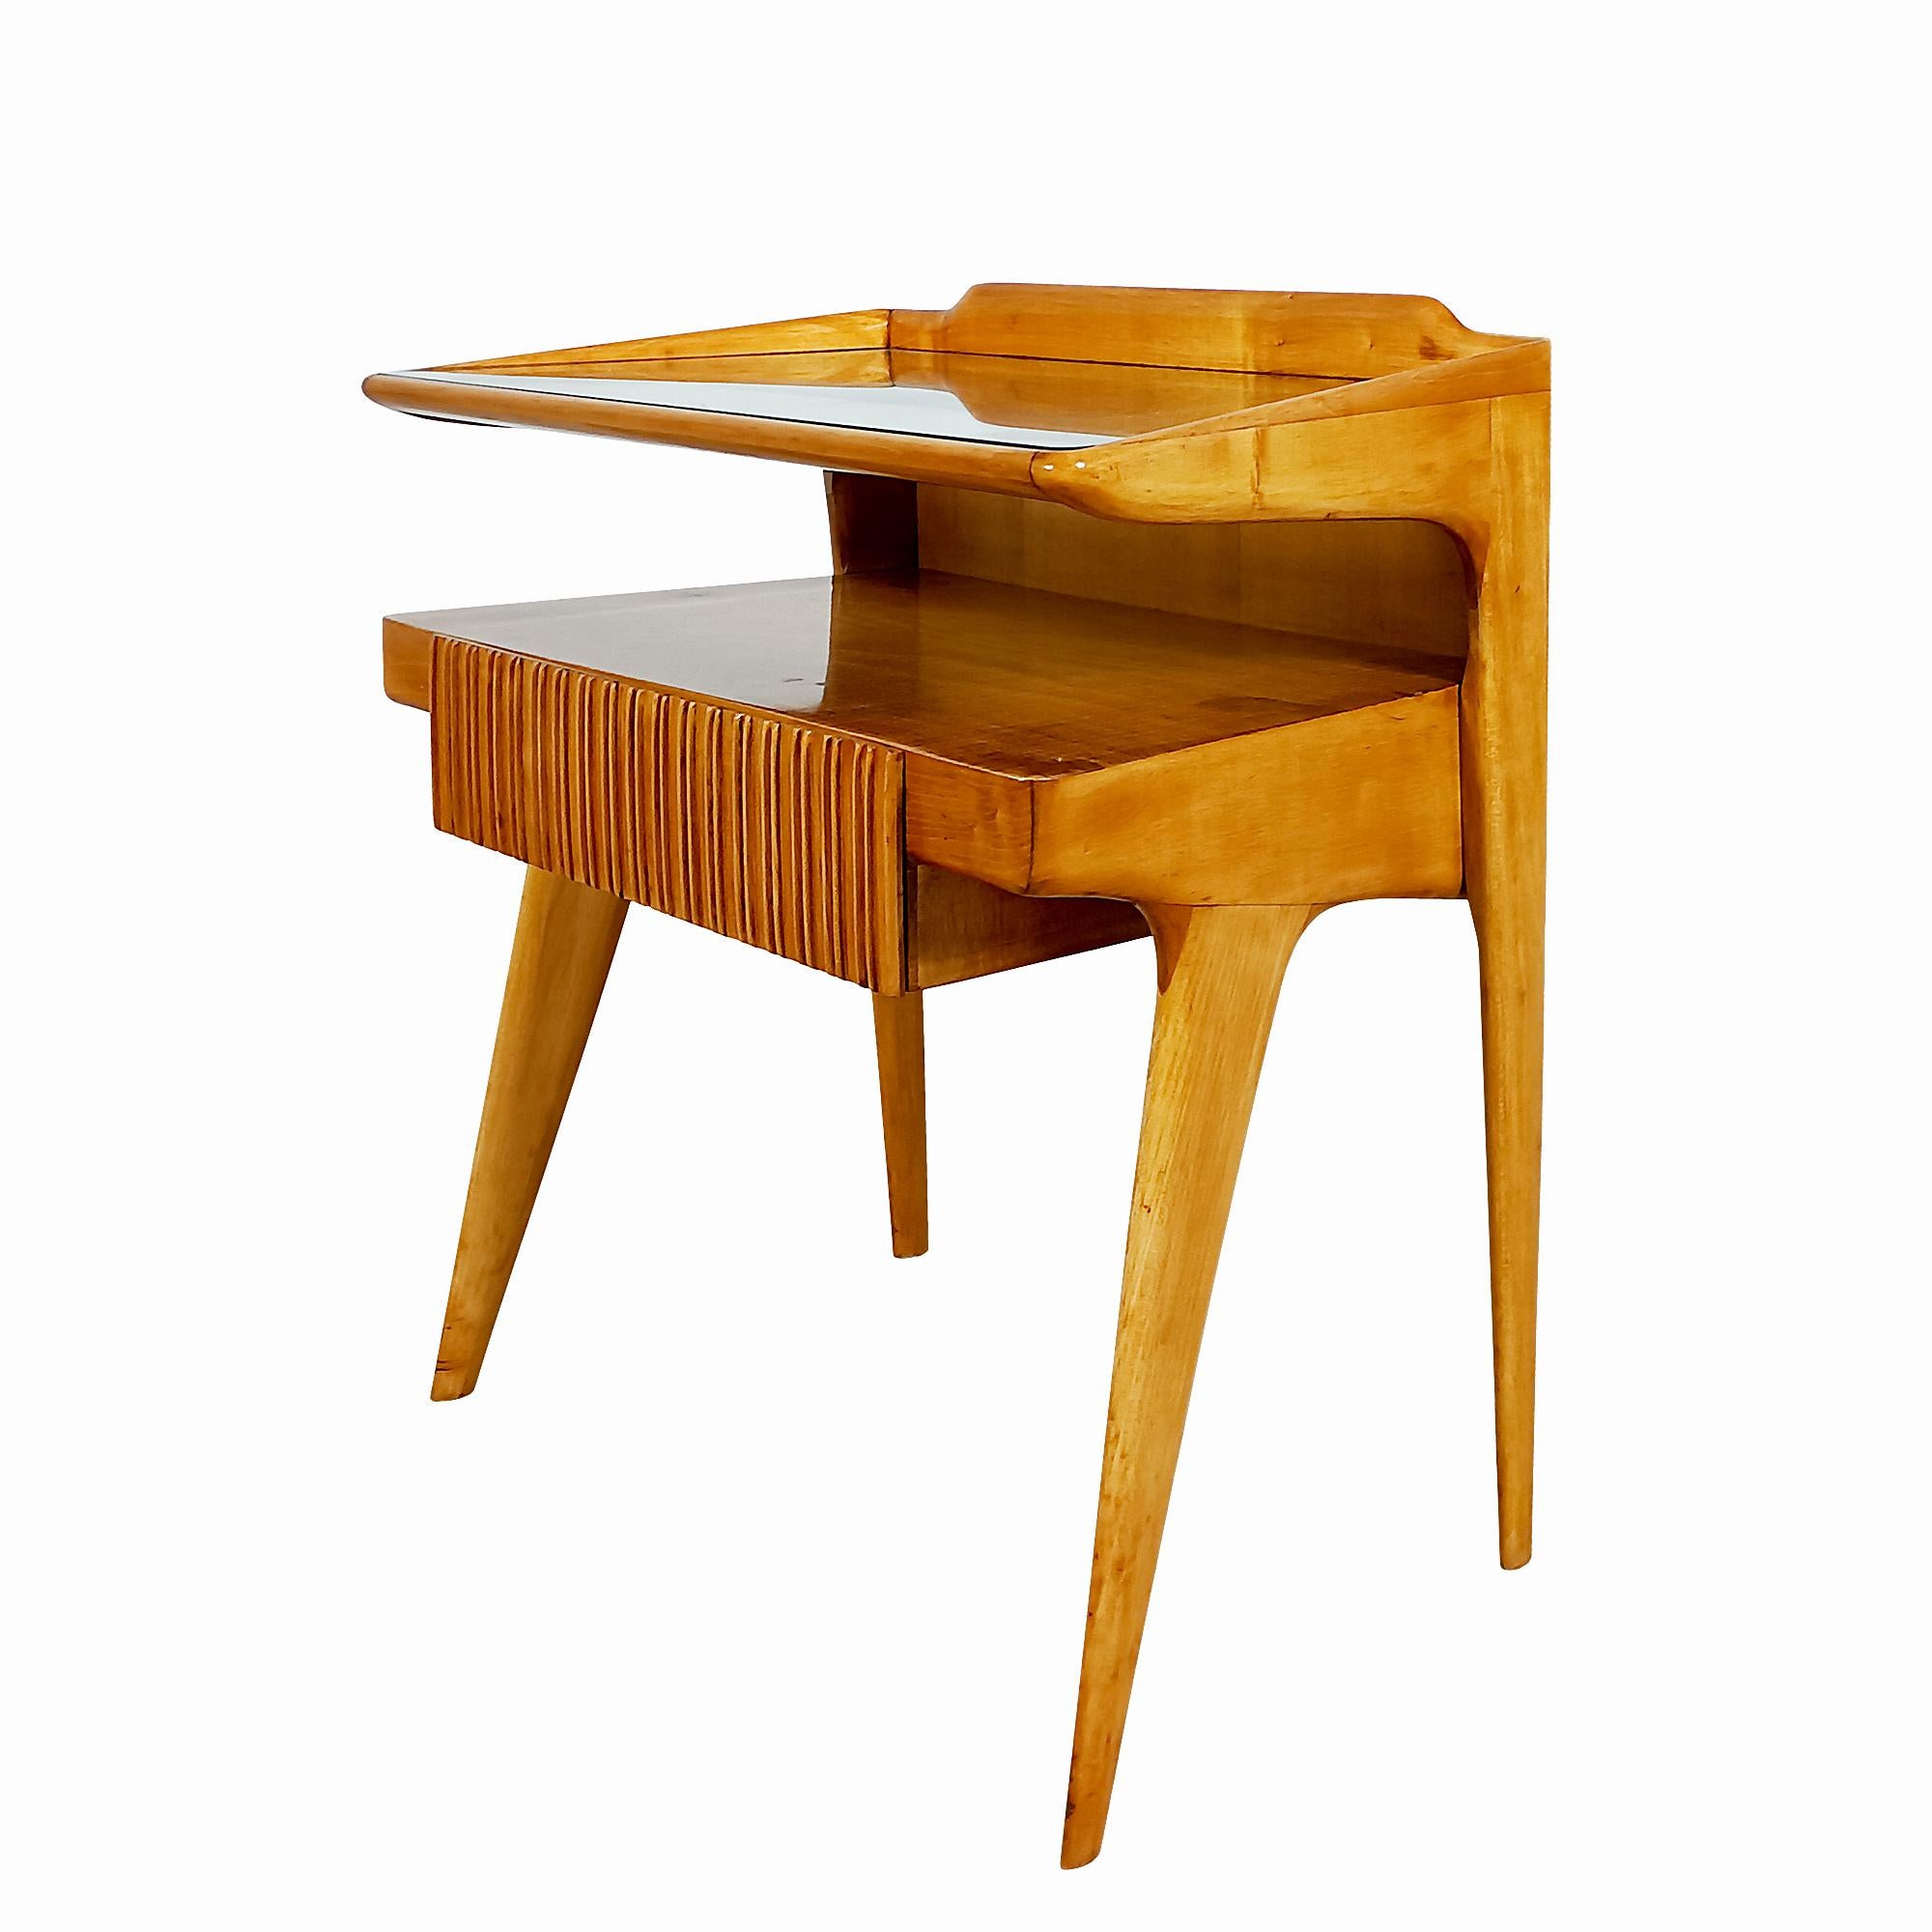 Italian Pair of Mid-Century Modern Bedside Tables in Solid Maple and Glass Shelf, Italy For Sale